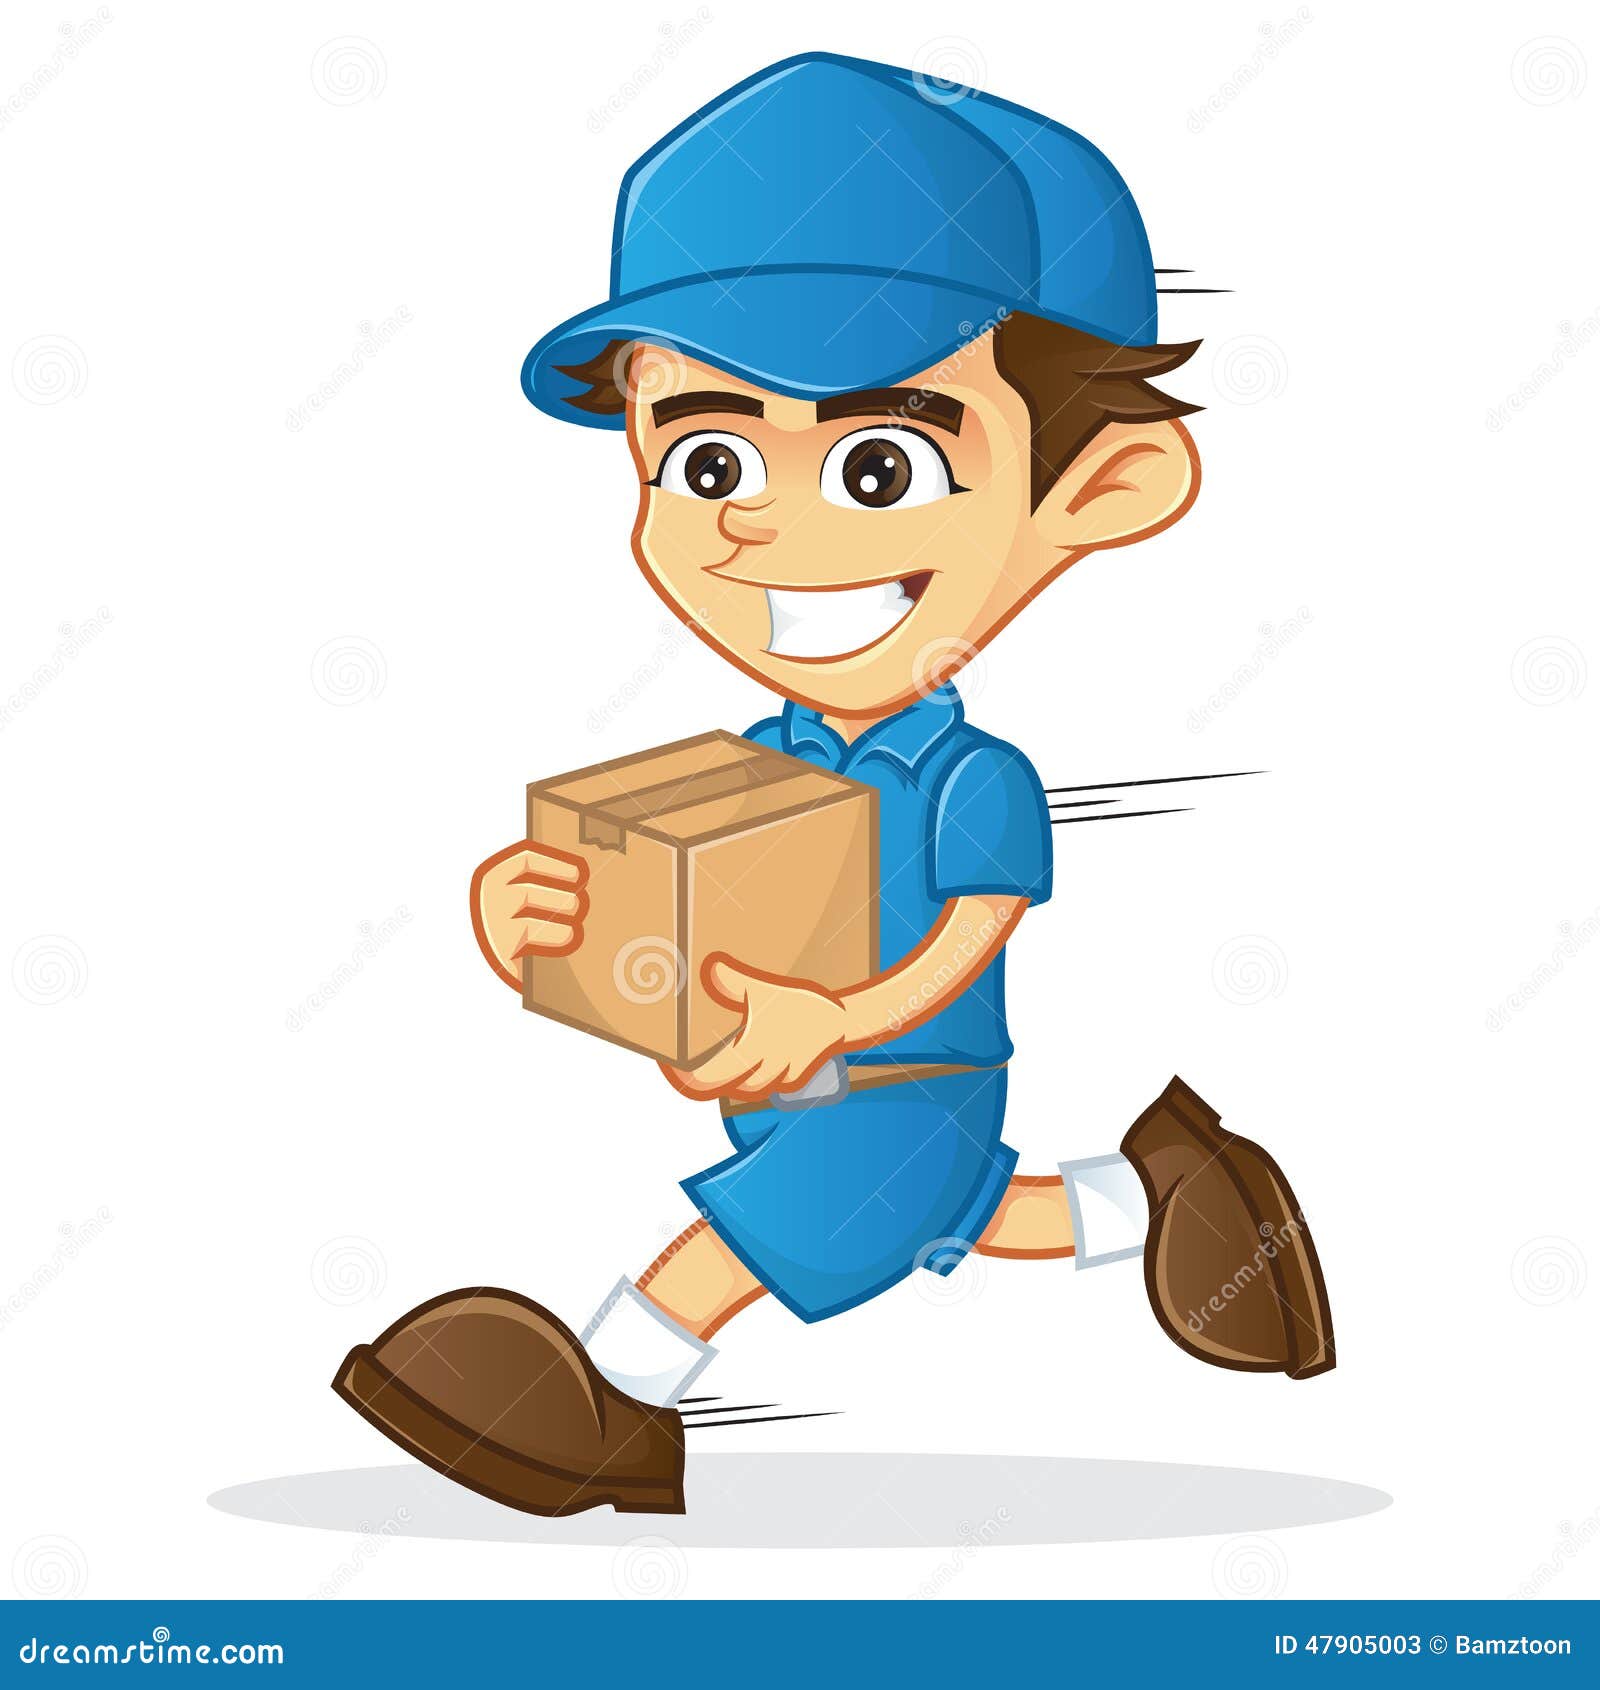 clipart delivery man - photo #12